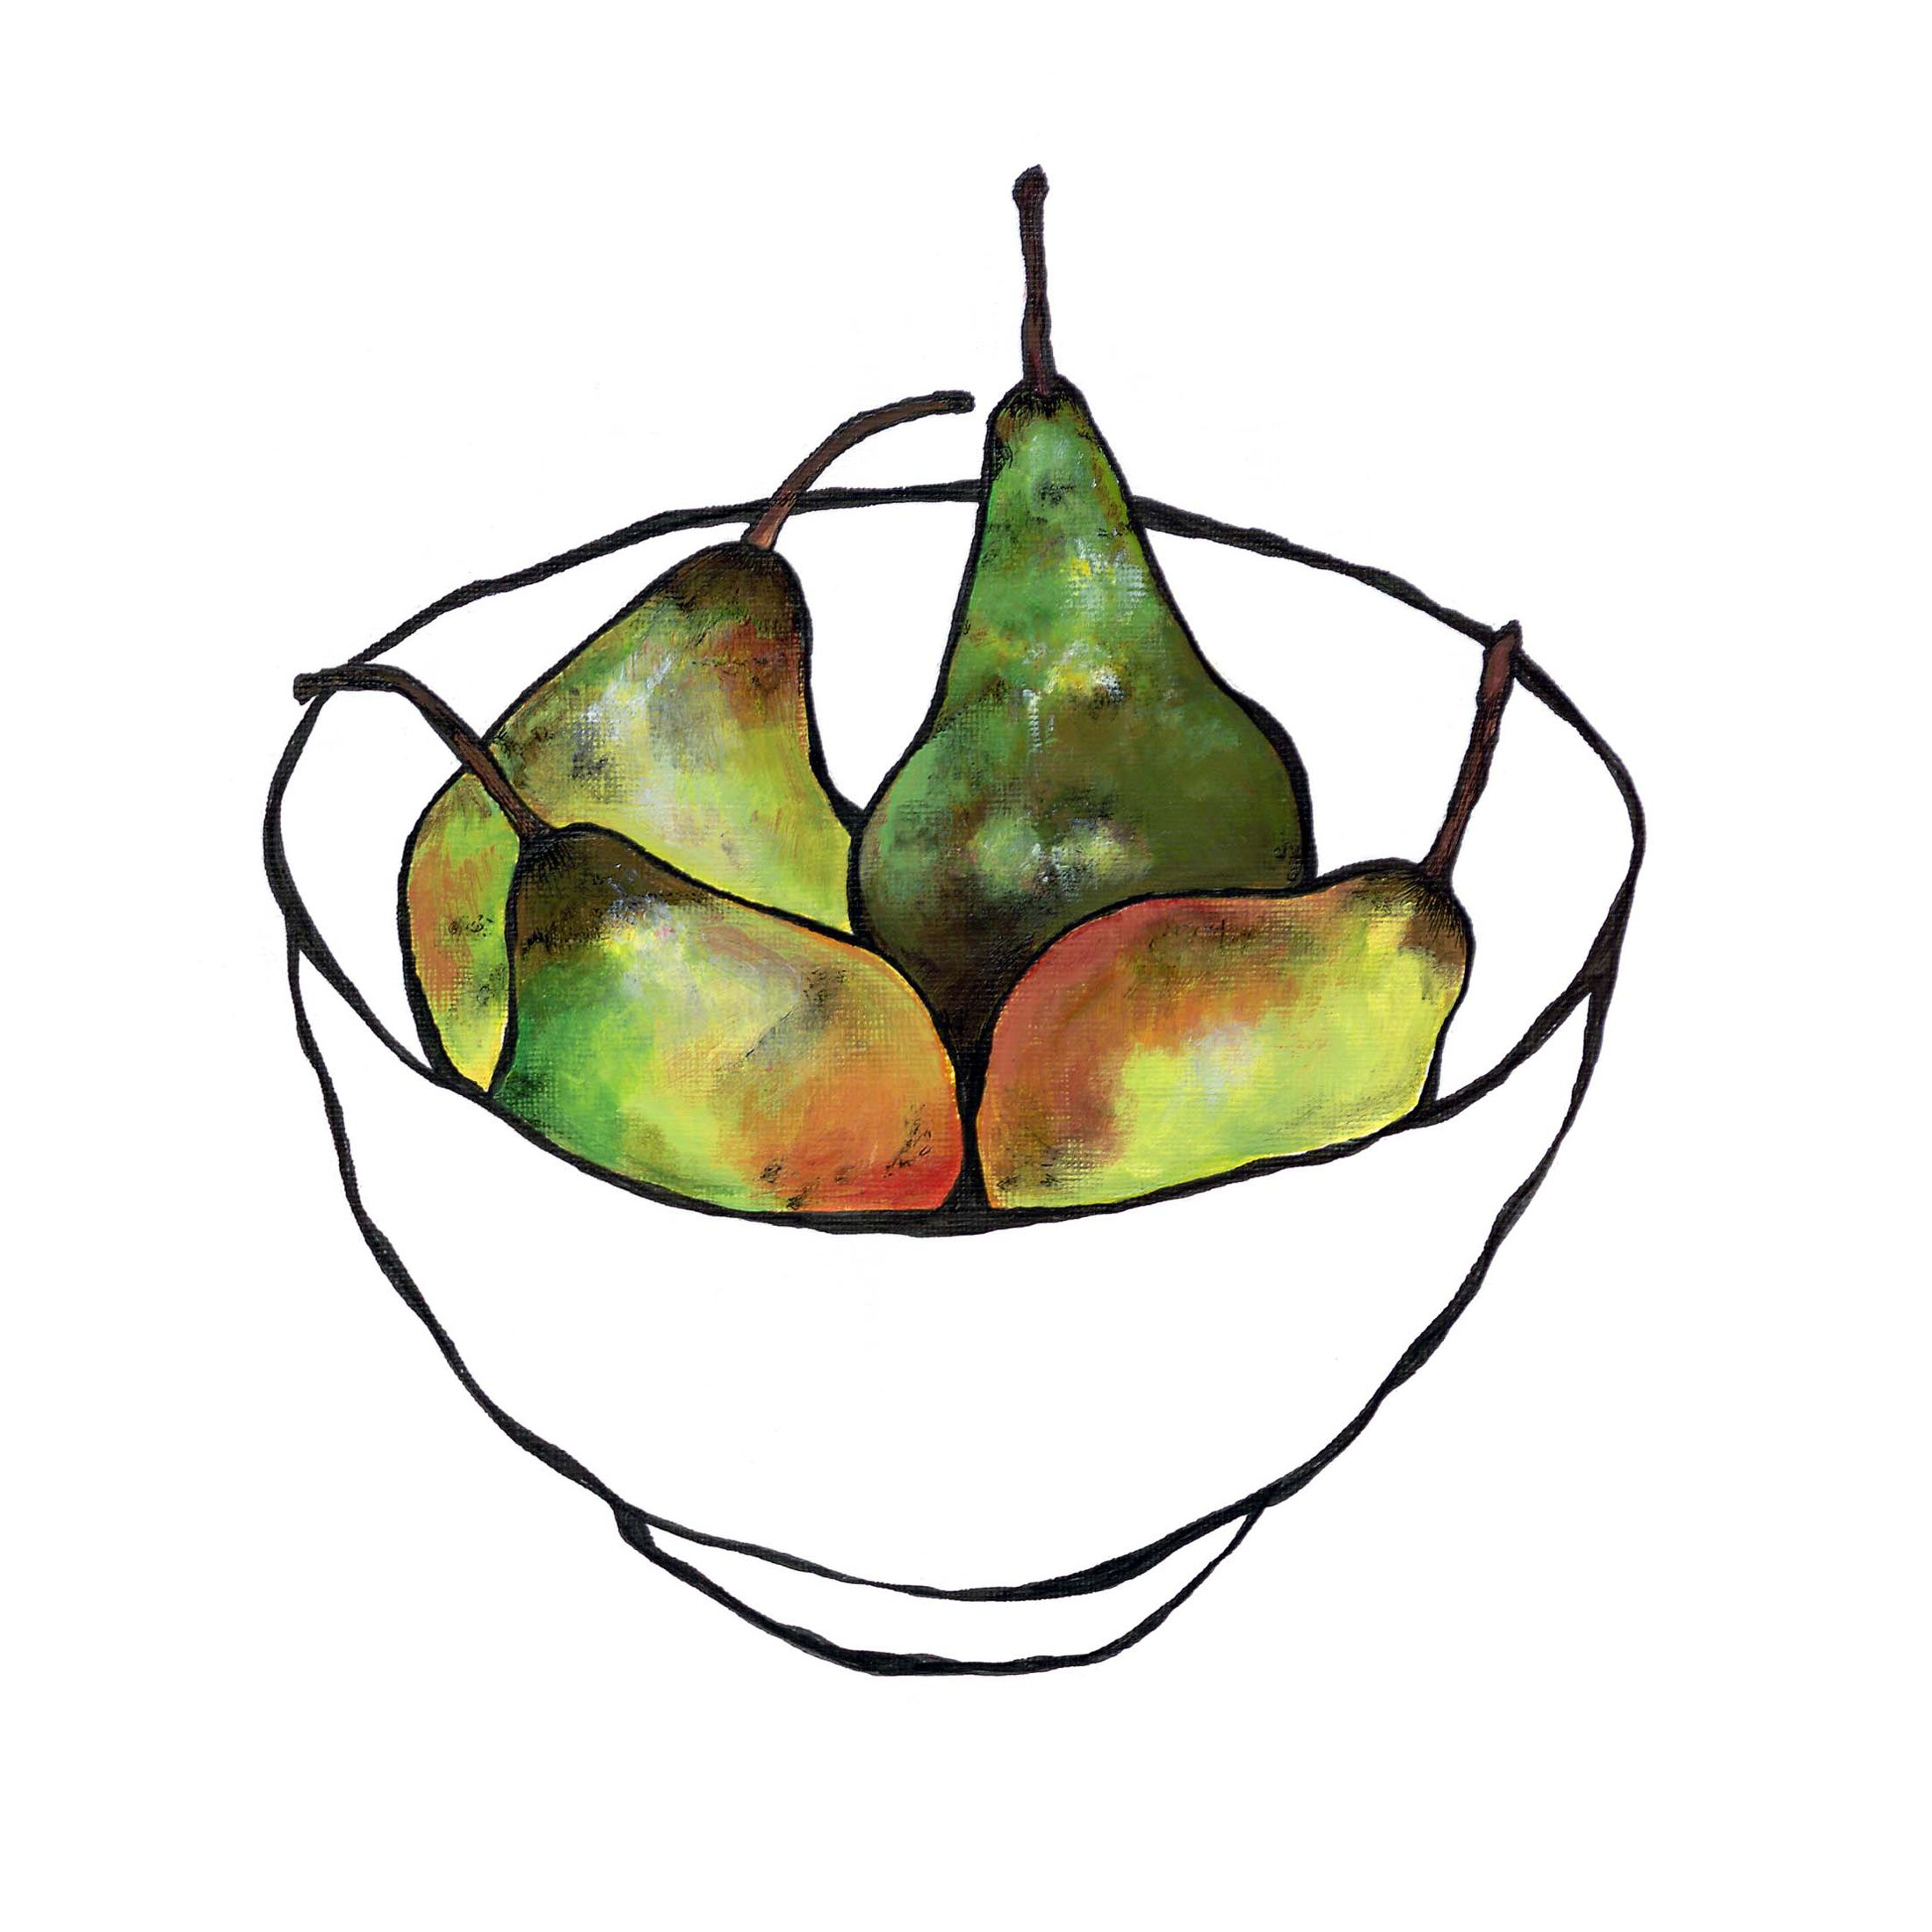 Just Pears by Lucy Routh